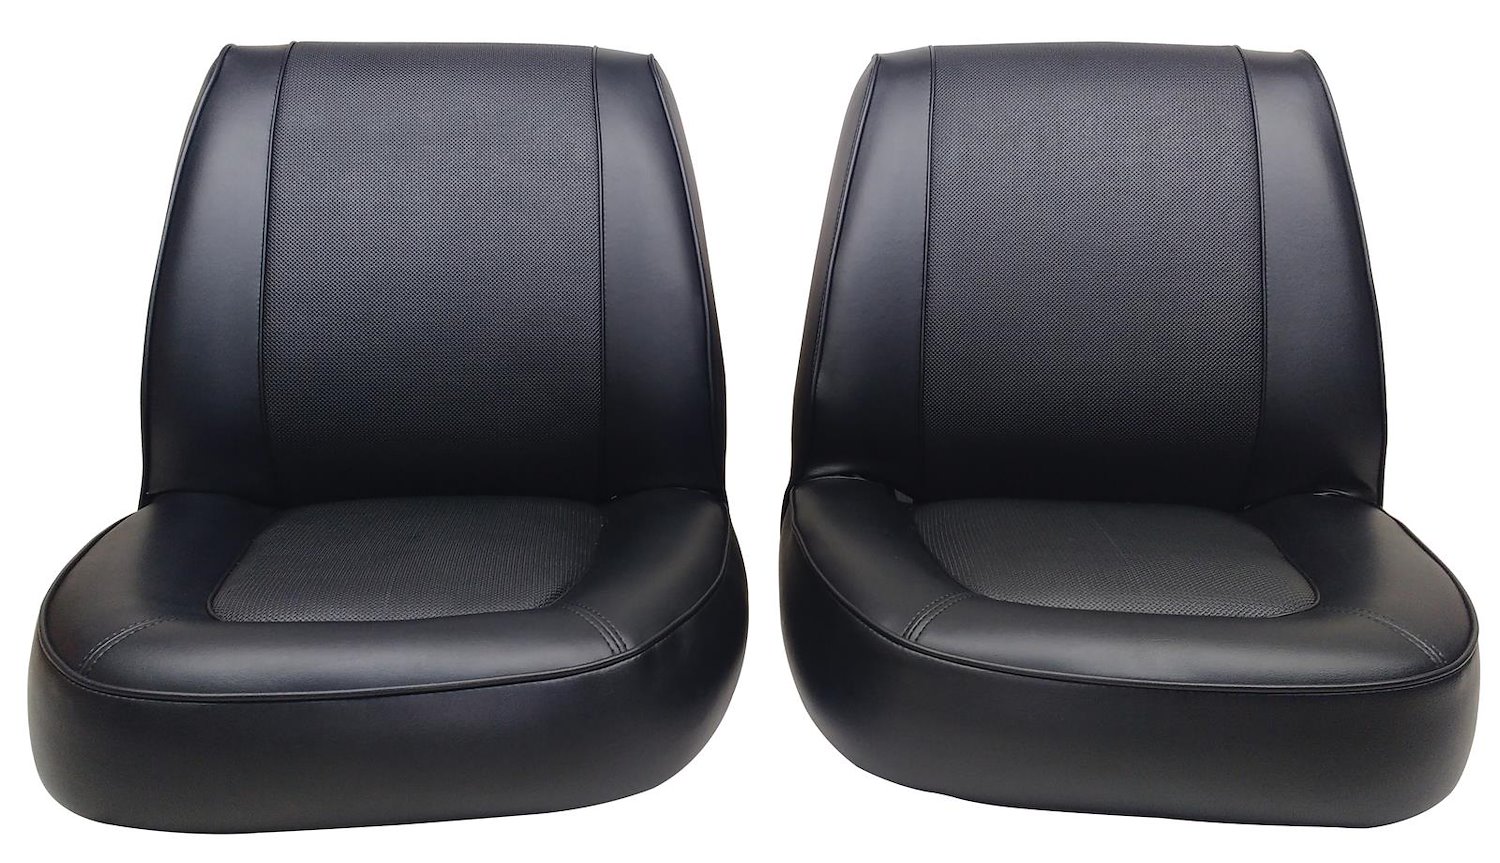 1962-1964 Ford Econoline Falcon Deluxe Club Wagon Interior Front Bucket Seat Upholstery Set